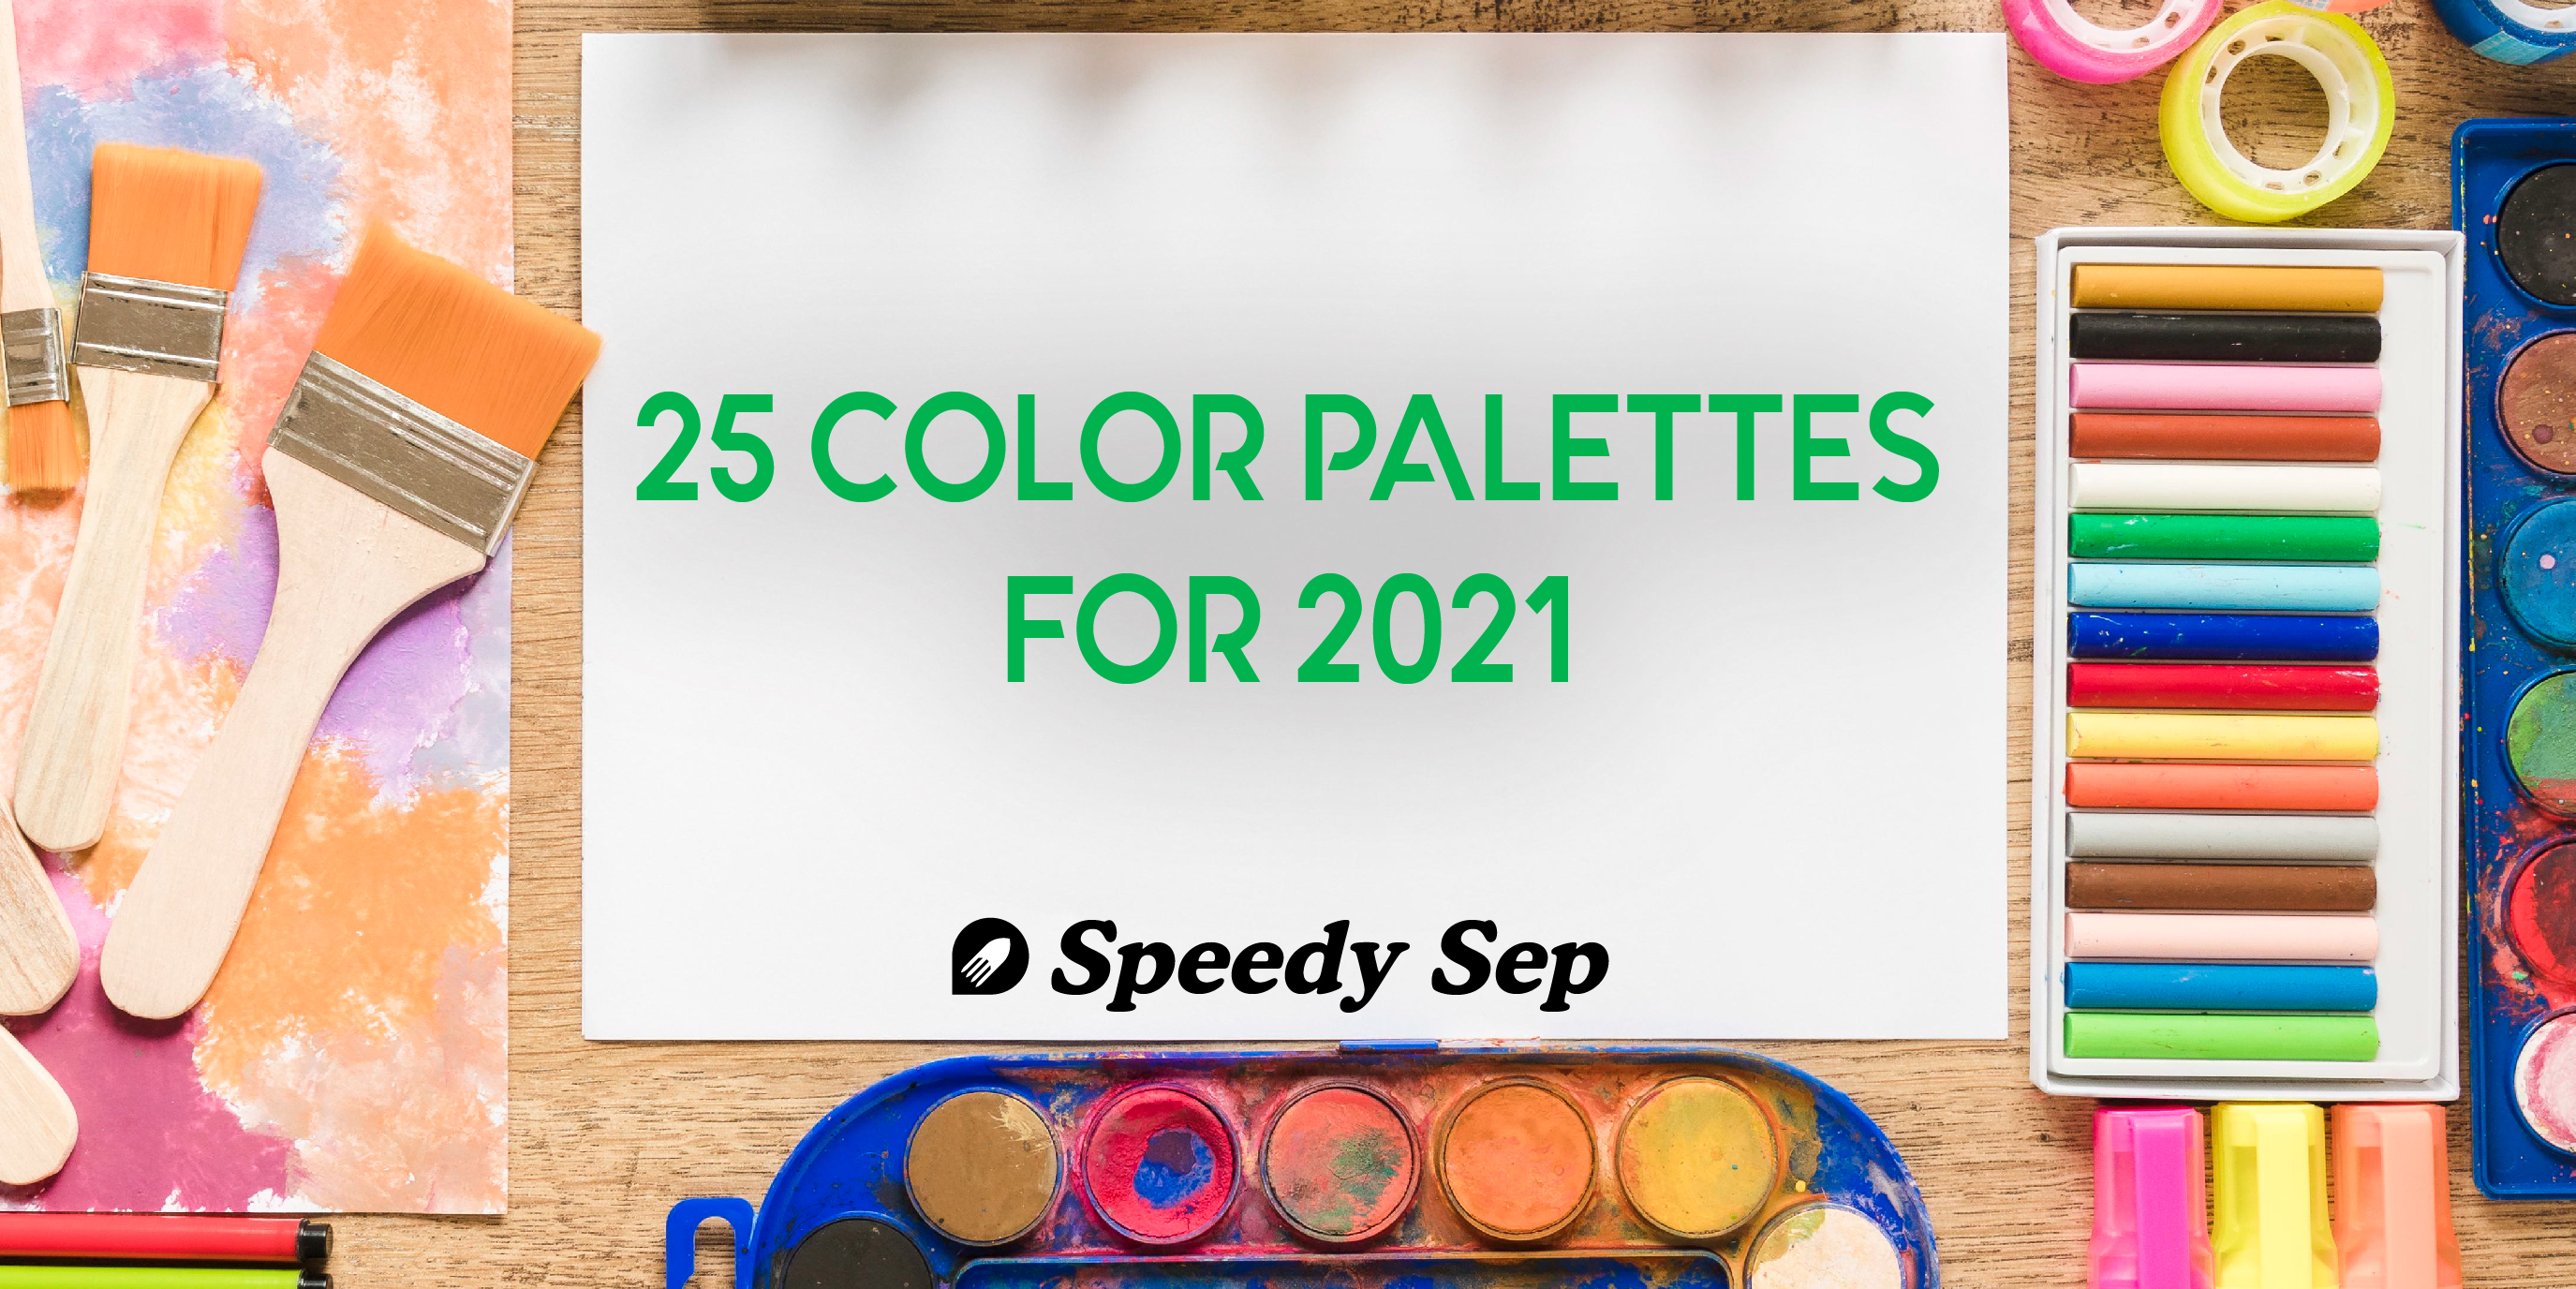 Top 25 Color Palettes for 2021